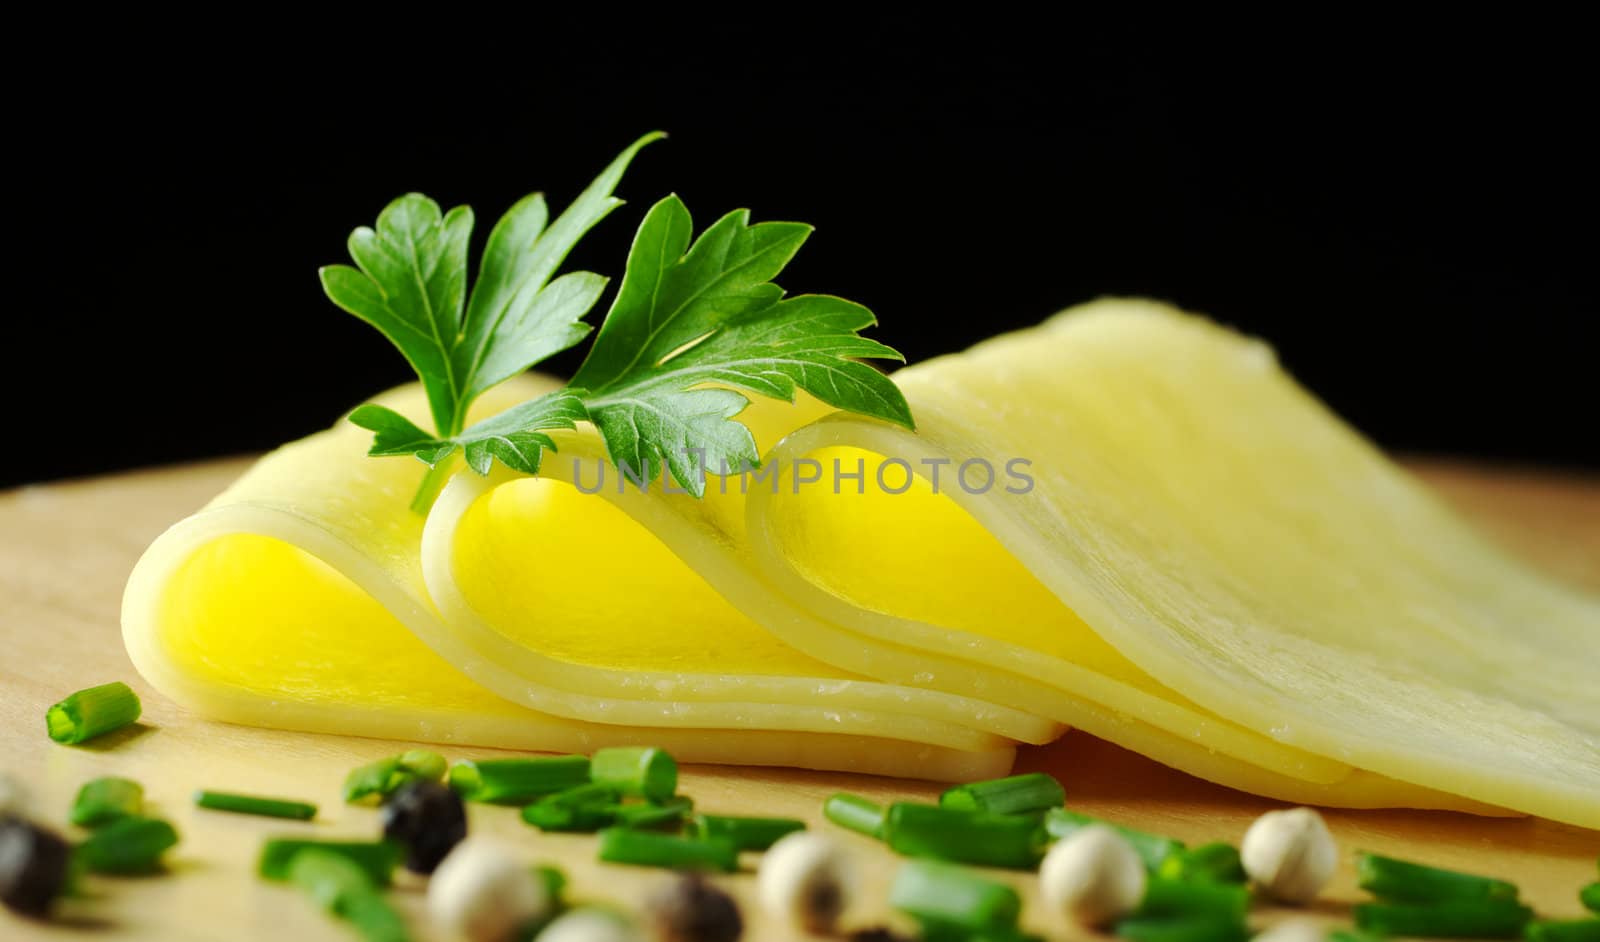 Cheese slices garnished with a parsley leaf and some shallot and pepper corns in the foreground on wooden board with black background (Selective Focus, Focus on the front of the slices and part of the parsley)